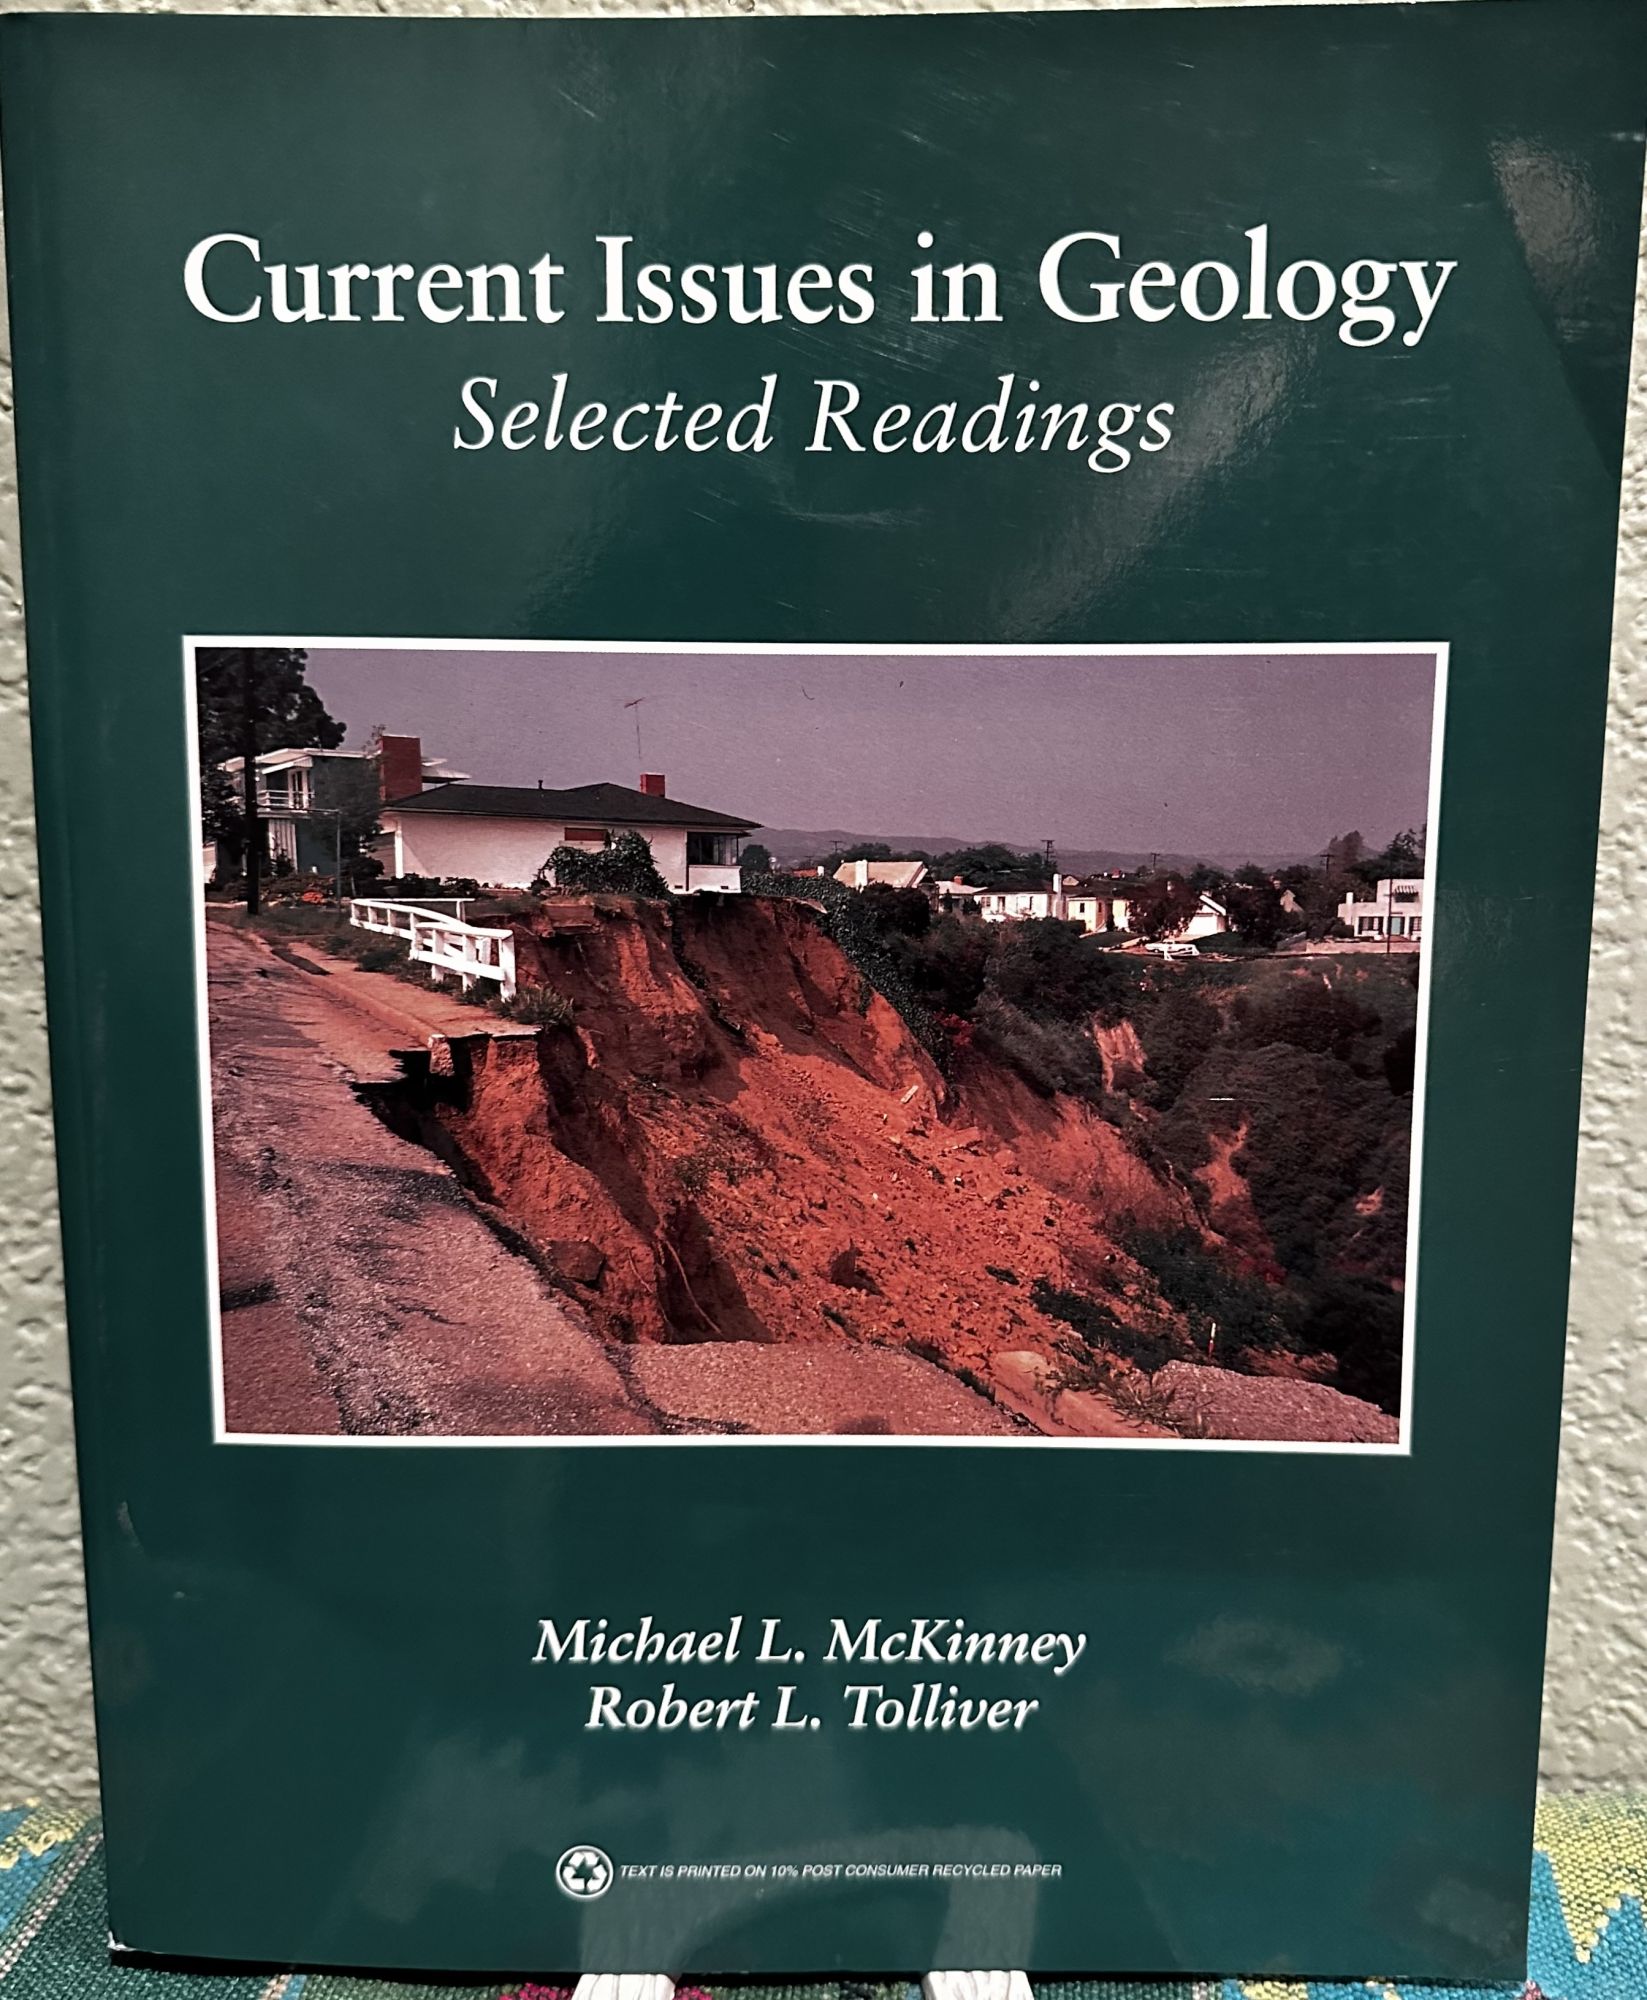 Current issues in geology: Selected Readings. Michael L. McKinney, Robert L. Tolliver.